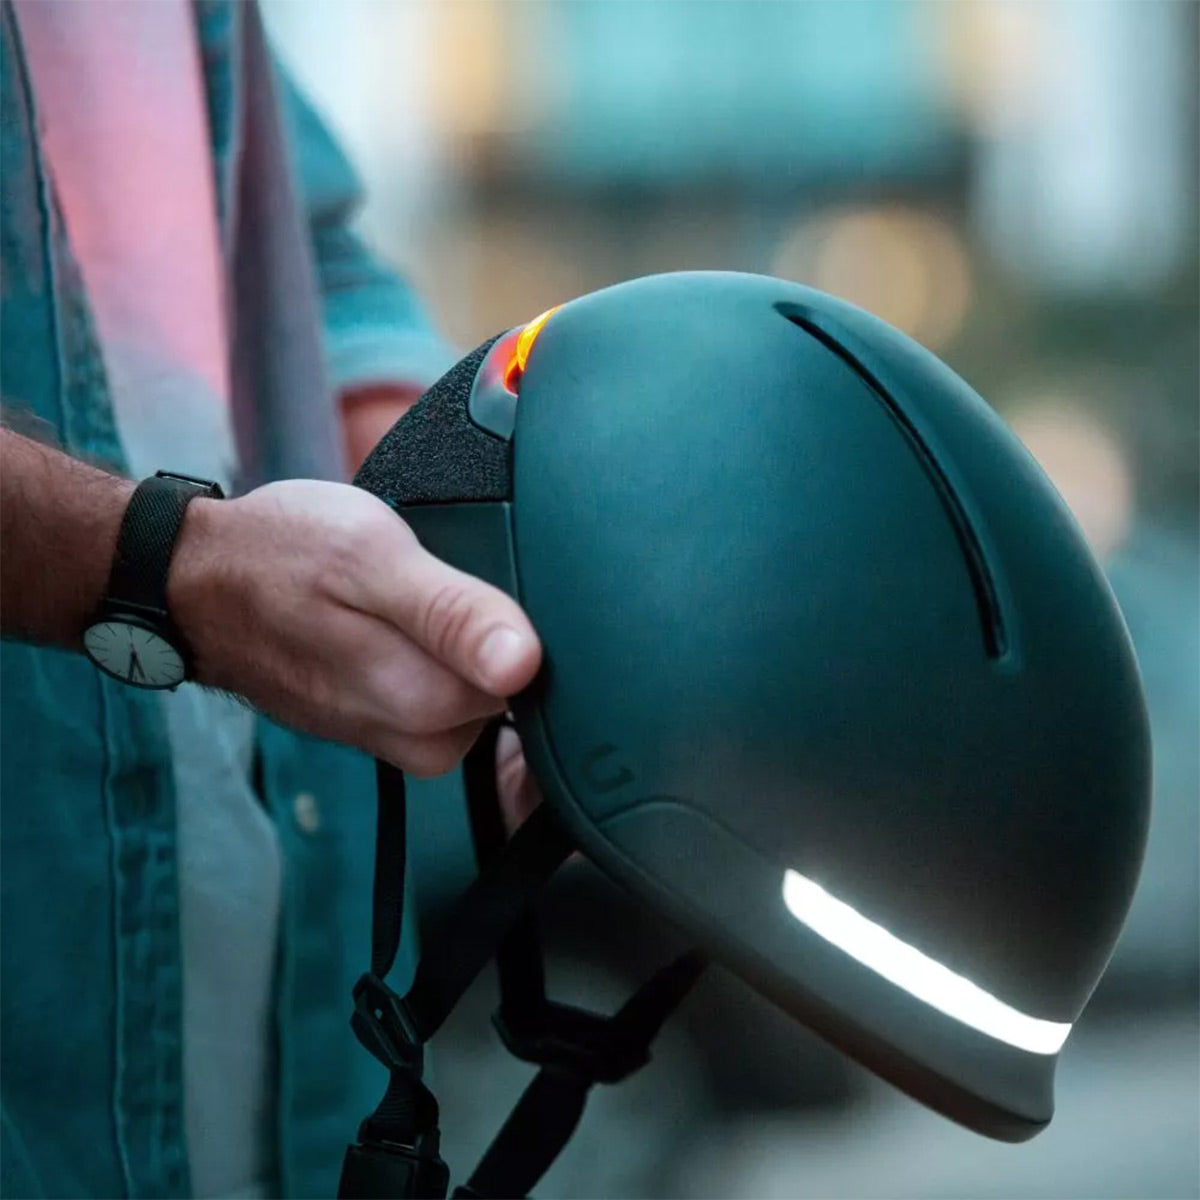 Unit 1 Medium FARO Smart Helmet with IPX-6 Rating and Mips Impact Safety System (Blackbird)